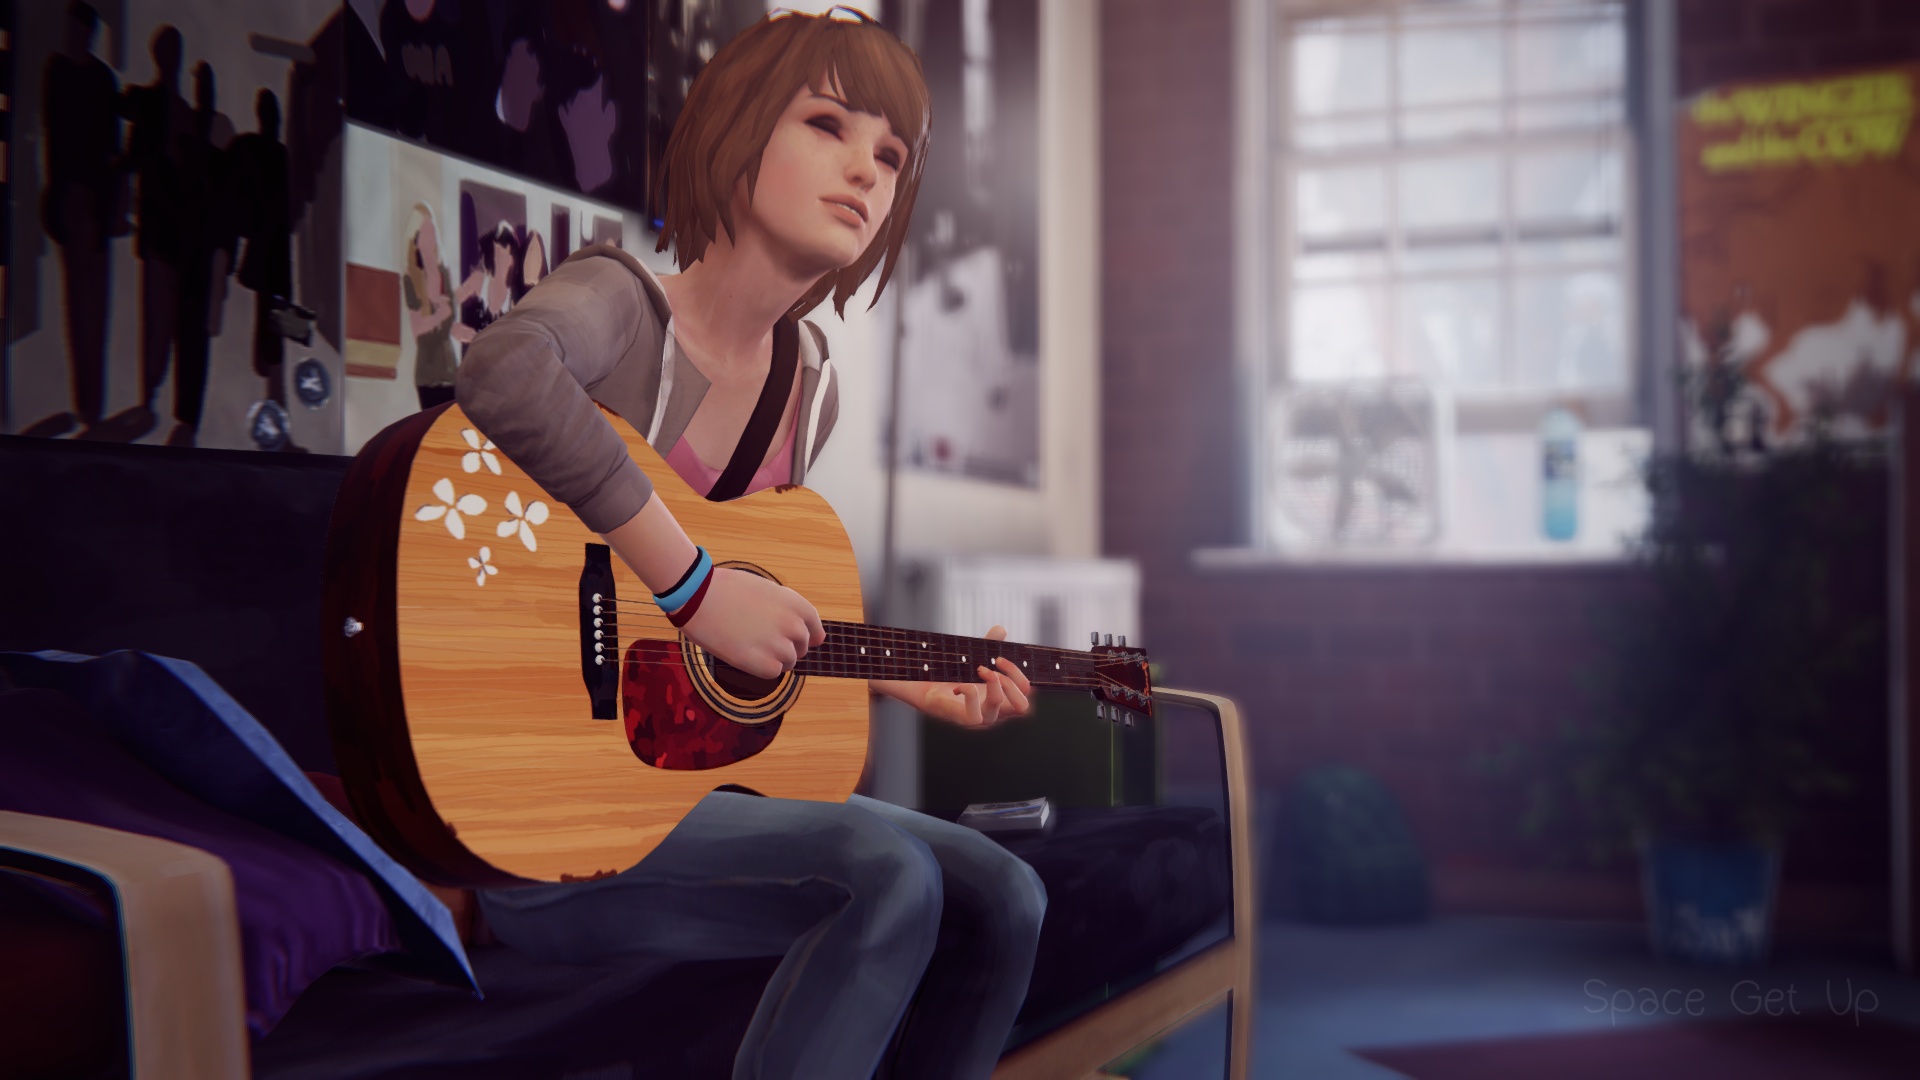 Life Is Strange Wallpapers Video Game Hq Life Is Strange Pictures 4k Wallpapers 19